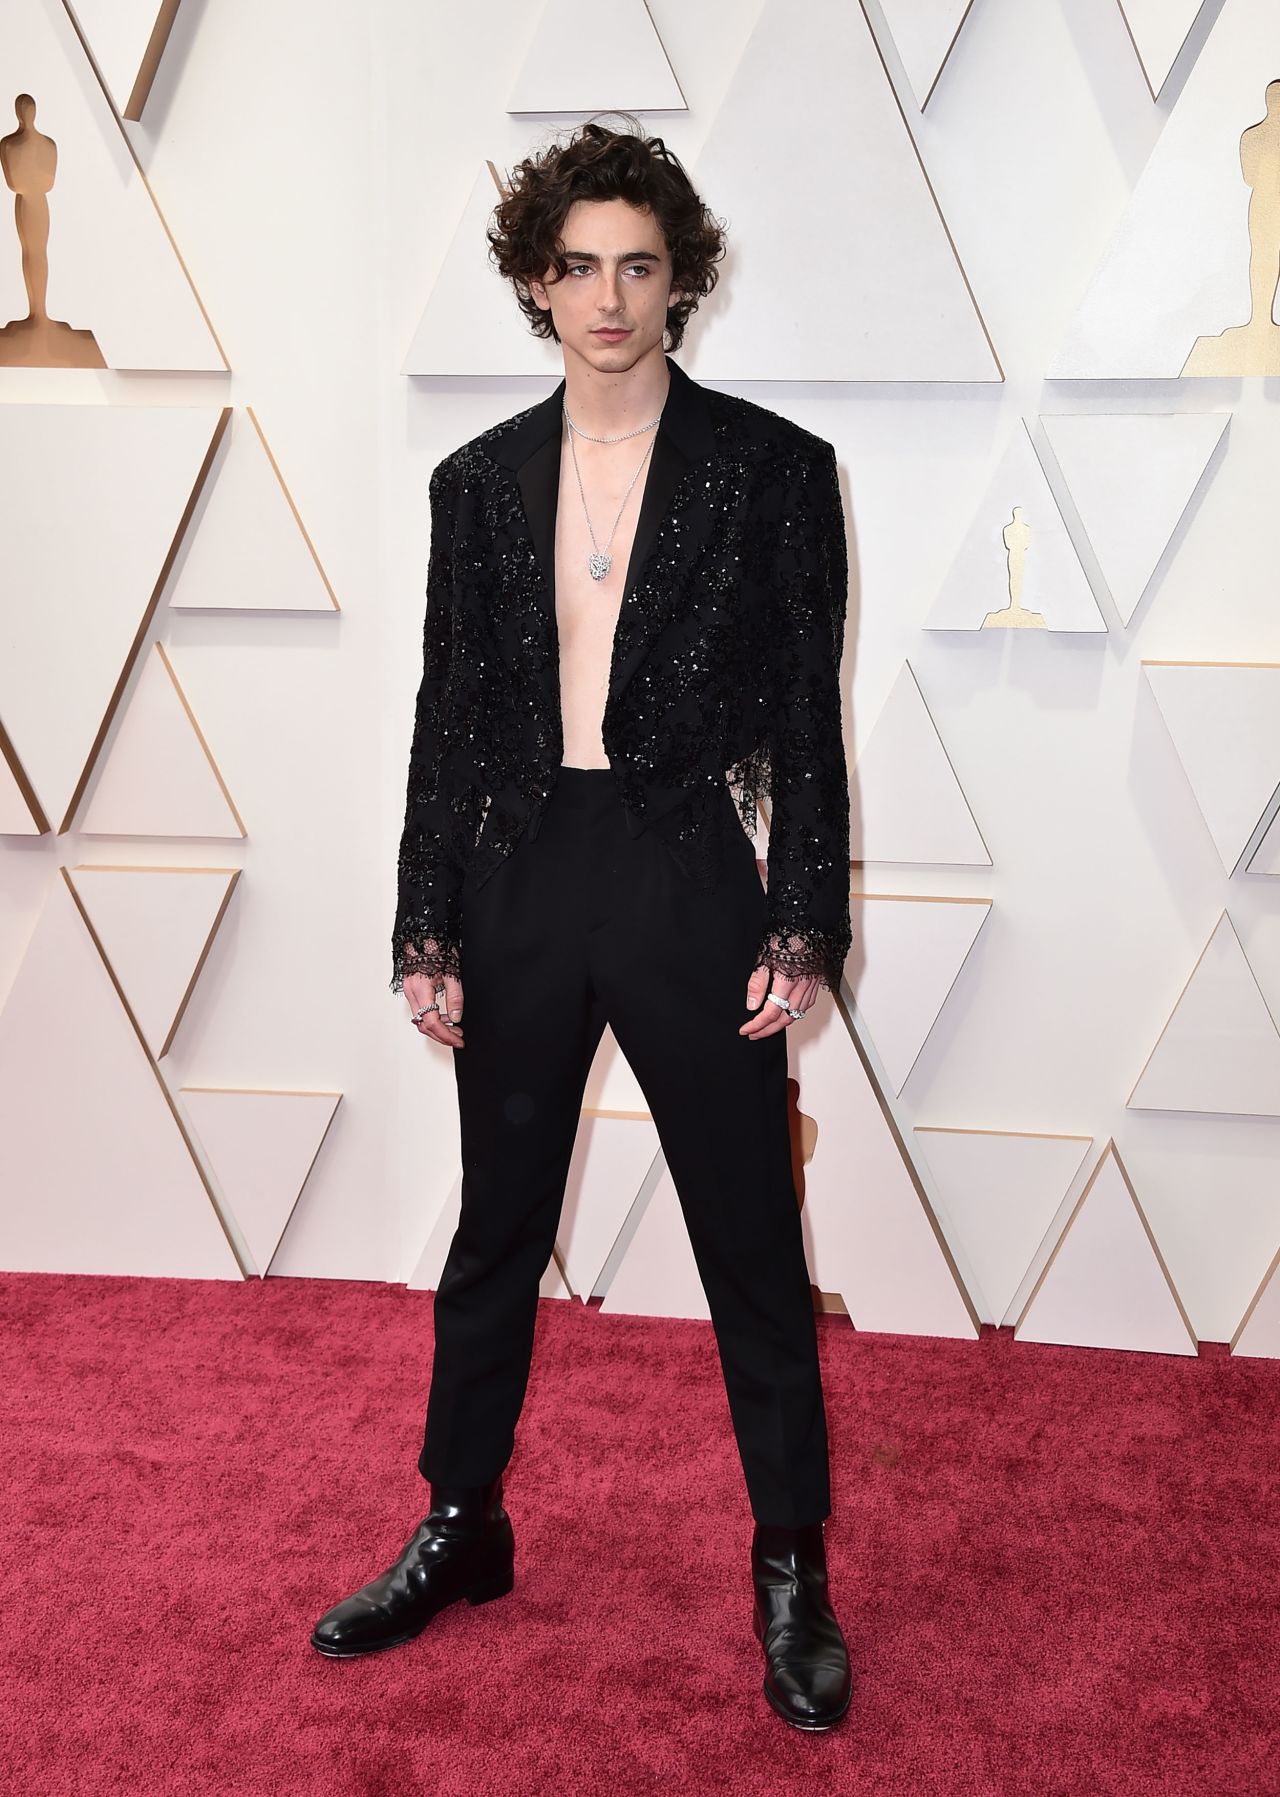 Timothée Chalamet bolstered his reputation as one of Hollywood's boldest dressers in an embroidered lace jacket and high-waisted pants from Louis Vuitton's Spring-Summer 2022 womenwear line. 